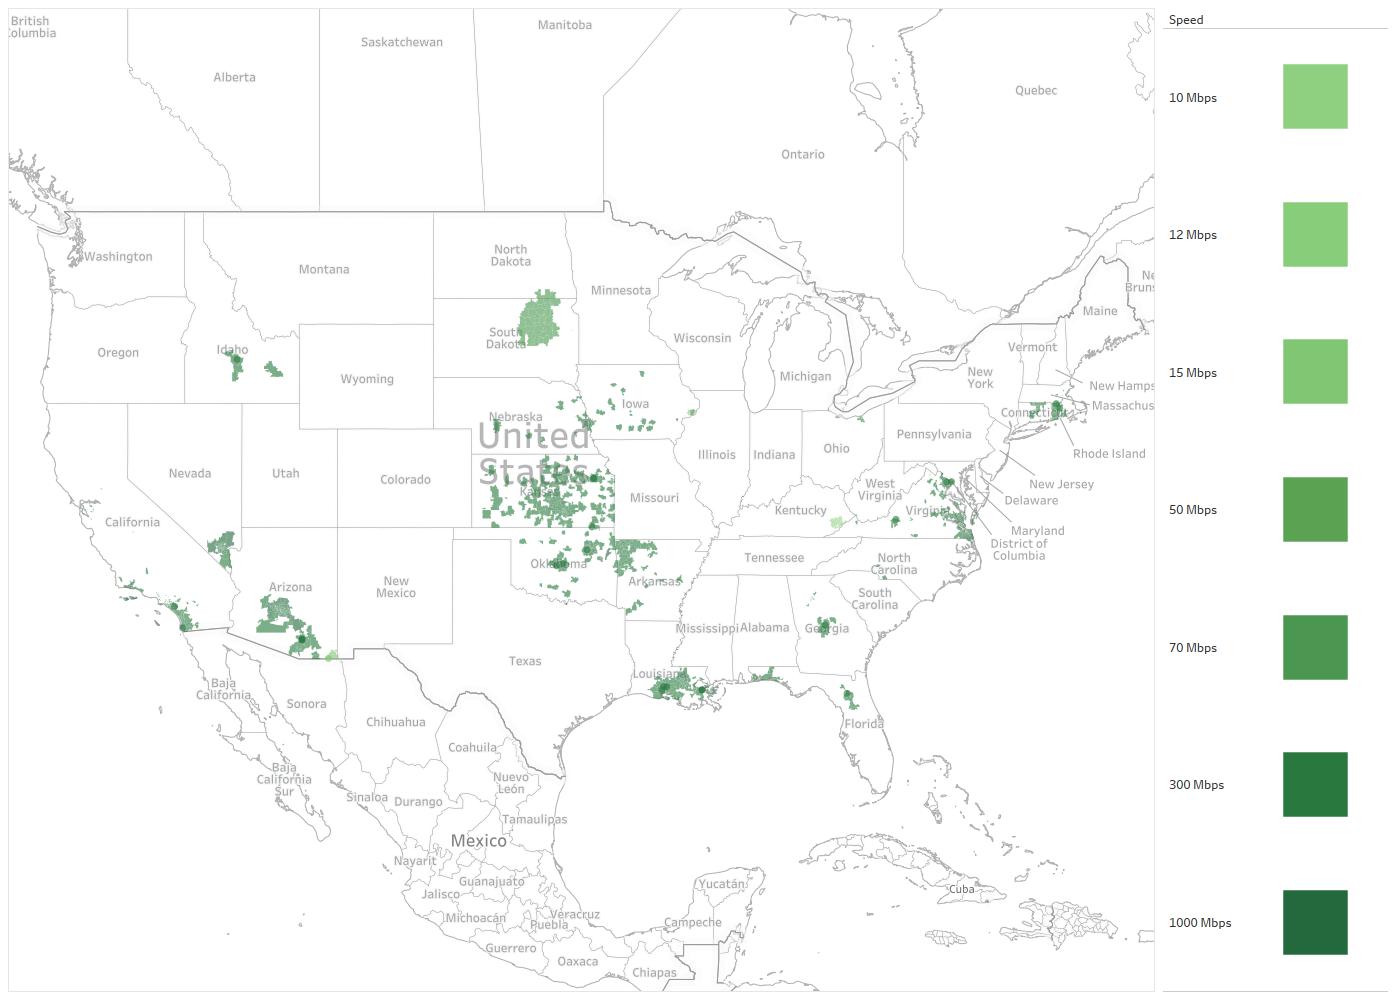 Cox Communications Availability Areas & Coverage Map - DecisionData